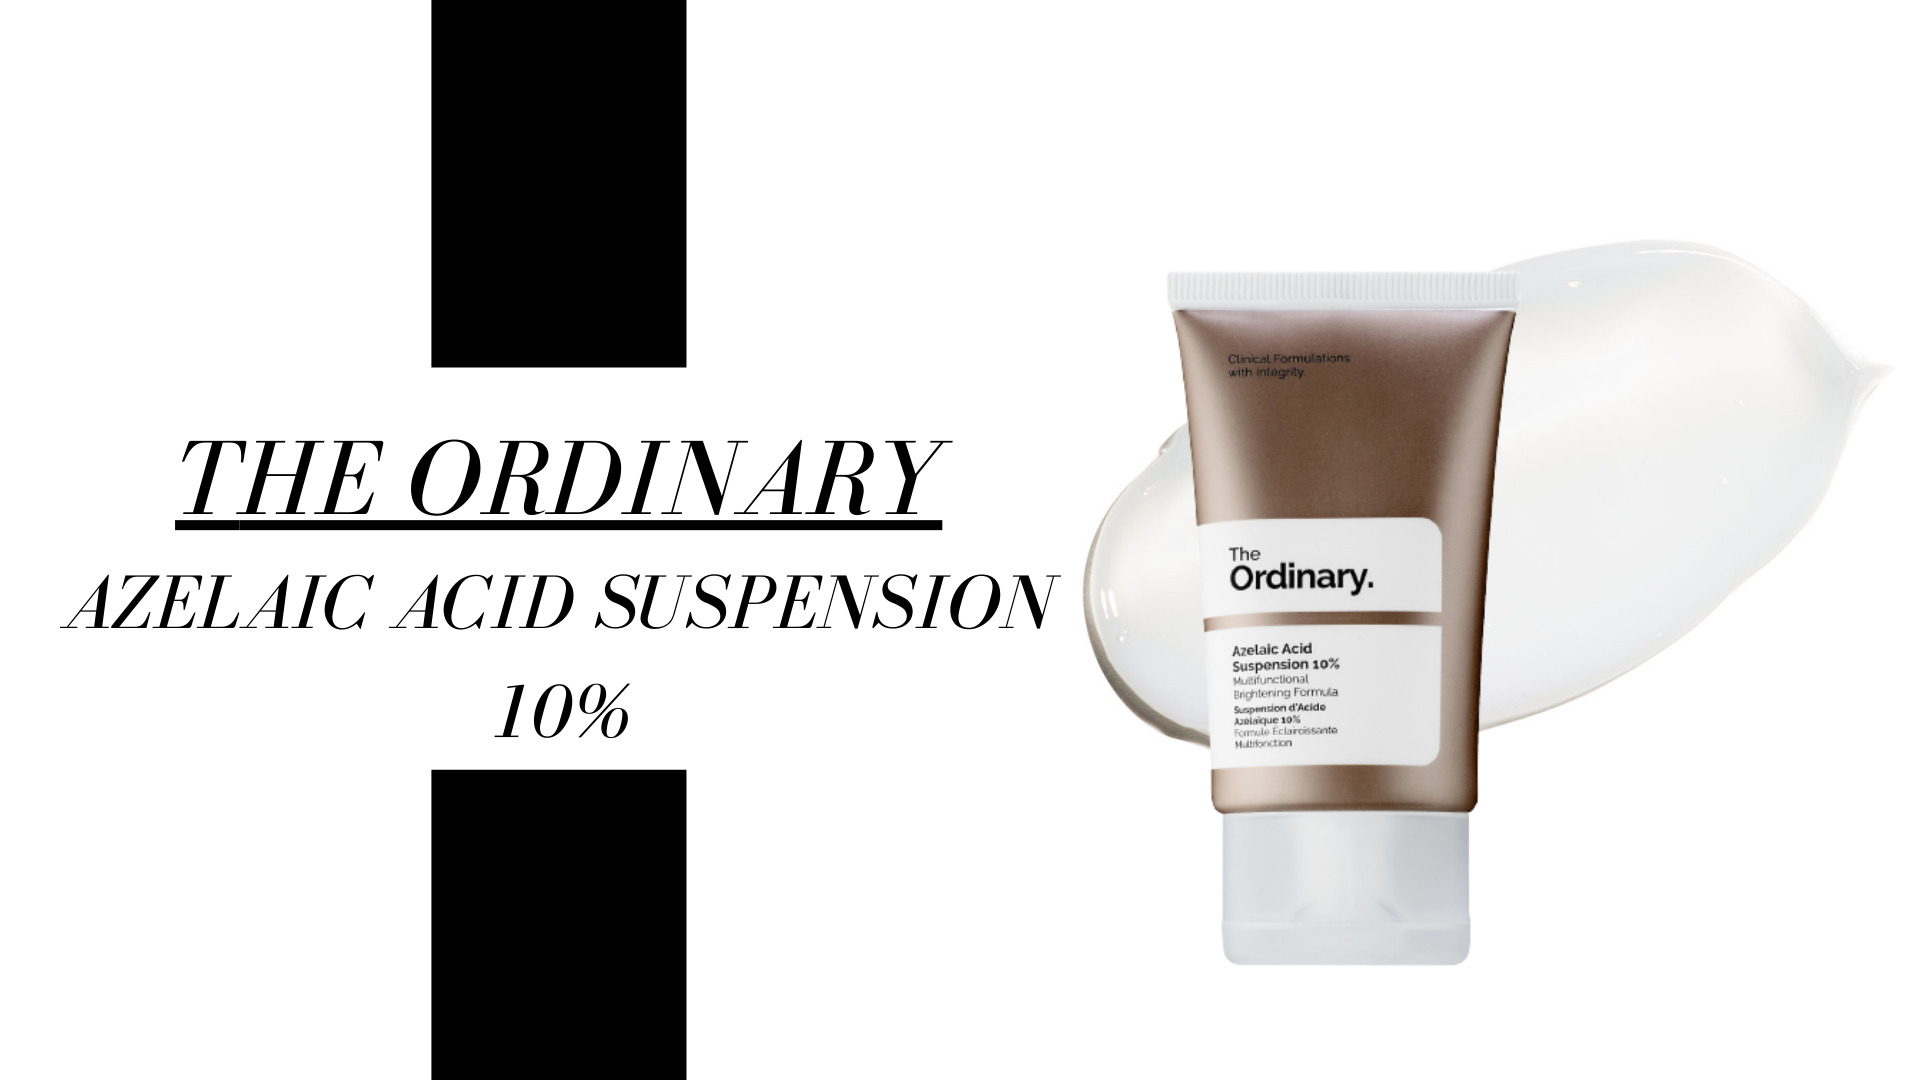 We had to talk about this product from The Ordinary. This multifunctional brightening formula works wonderfully with all skin types and will resolve skin concerns related to uneven skin tone, dullness and uneven texture, and problems associated with acne and blemishes.